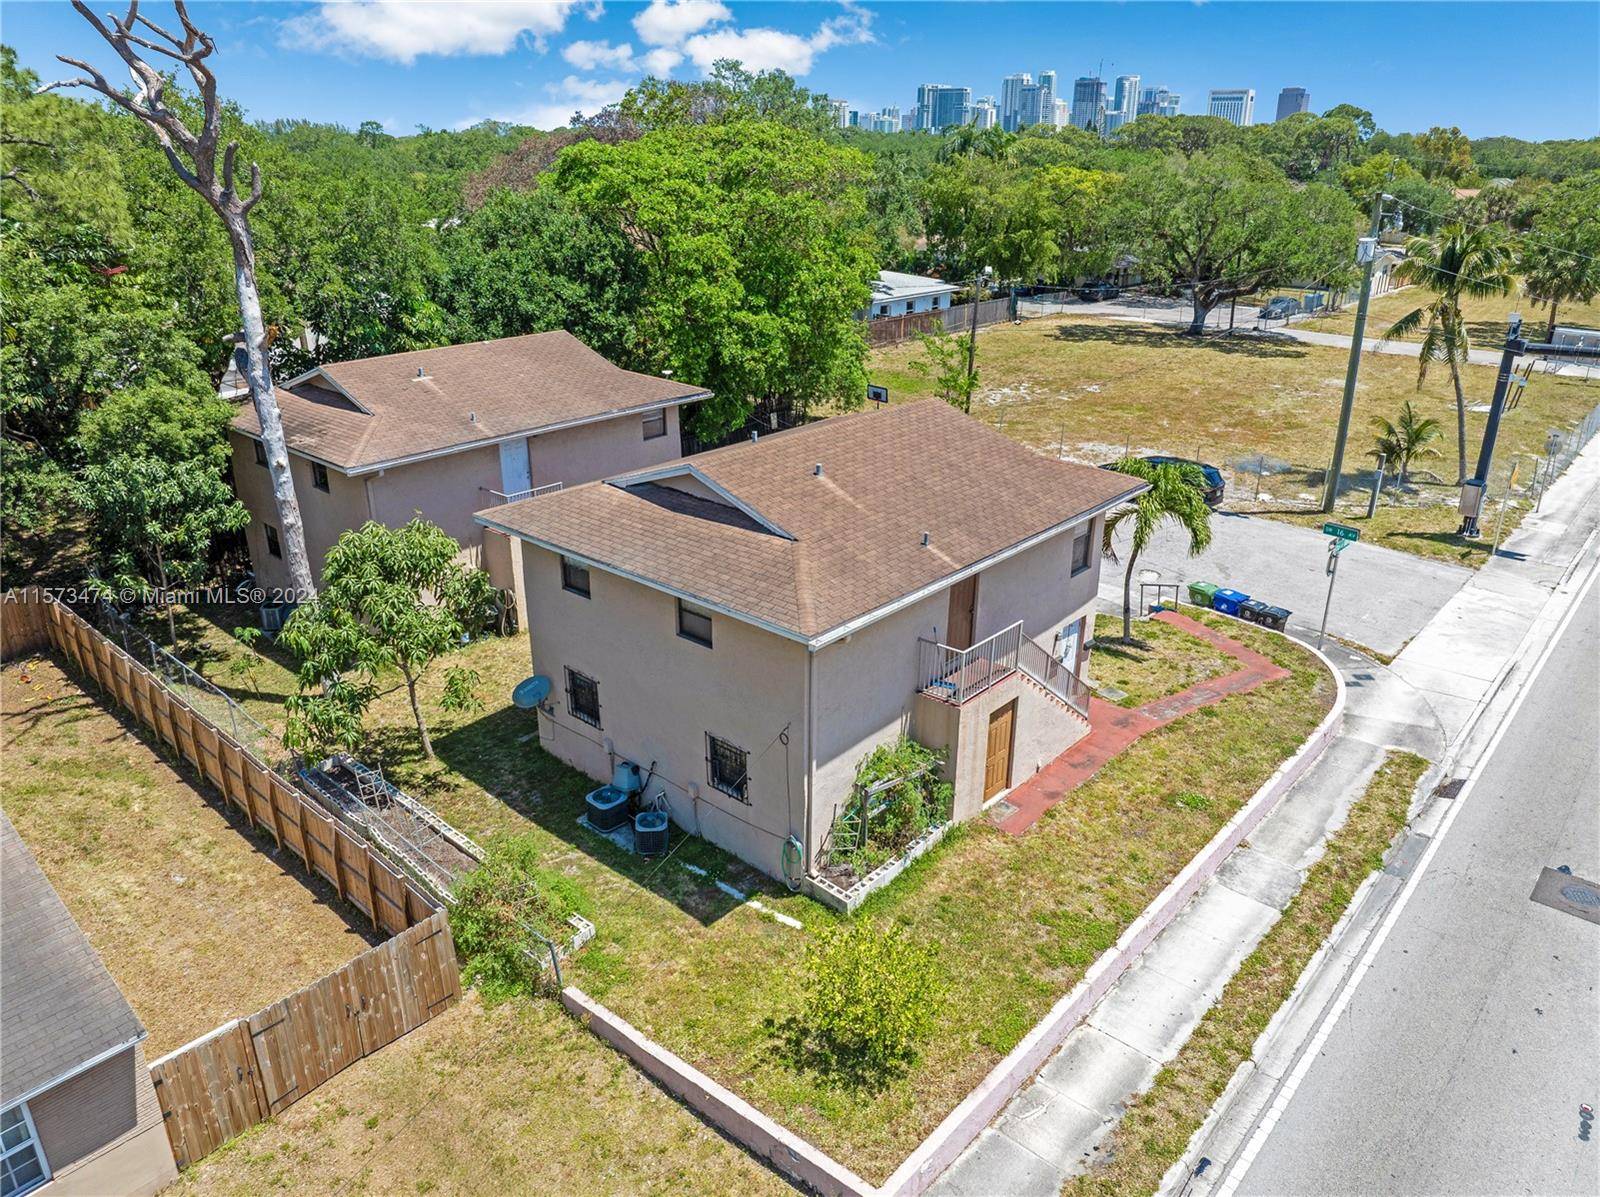 Excellent investment opportunity in Fort Lauderdale with this multifamily with two independent buildings.